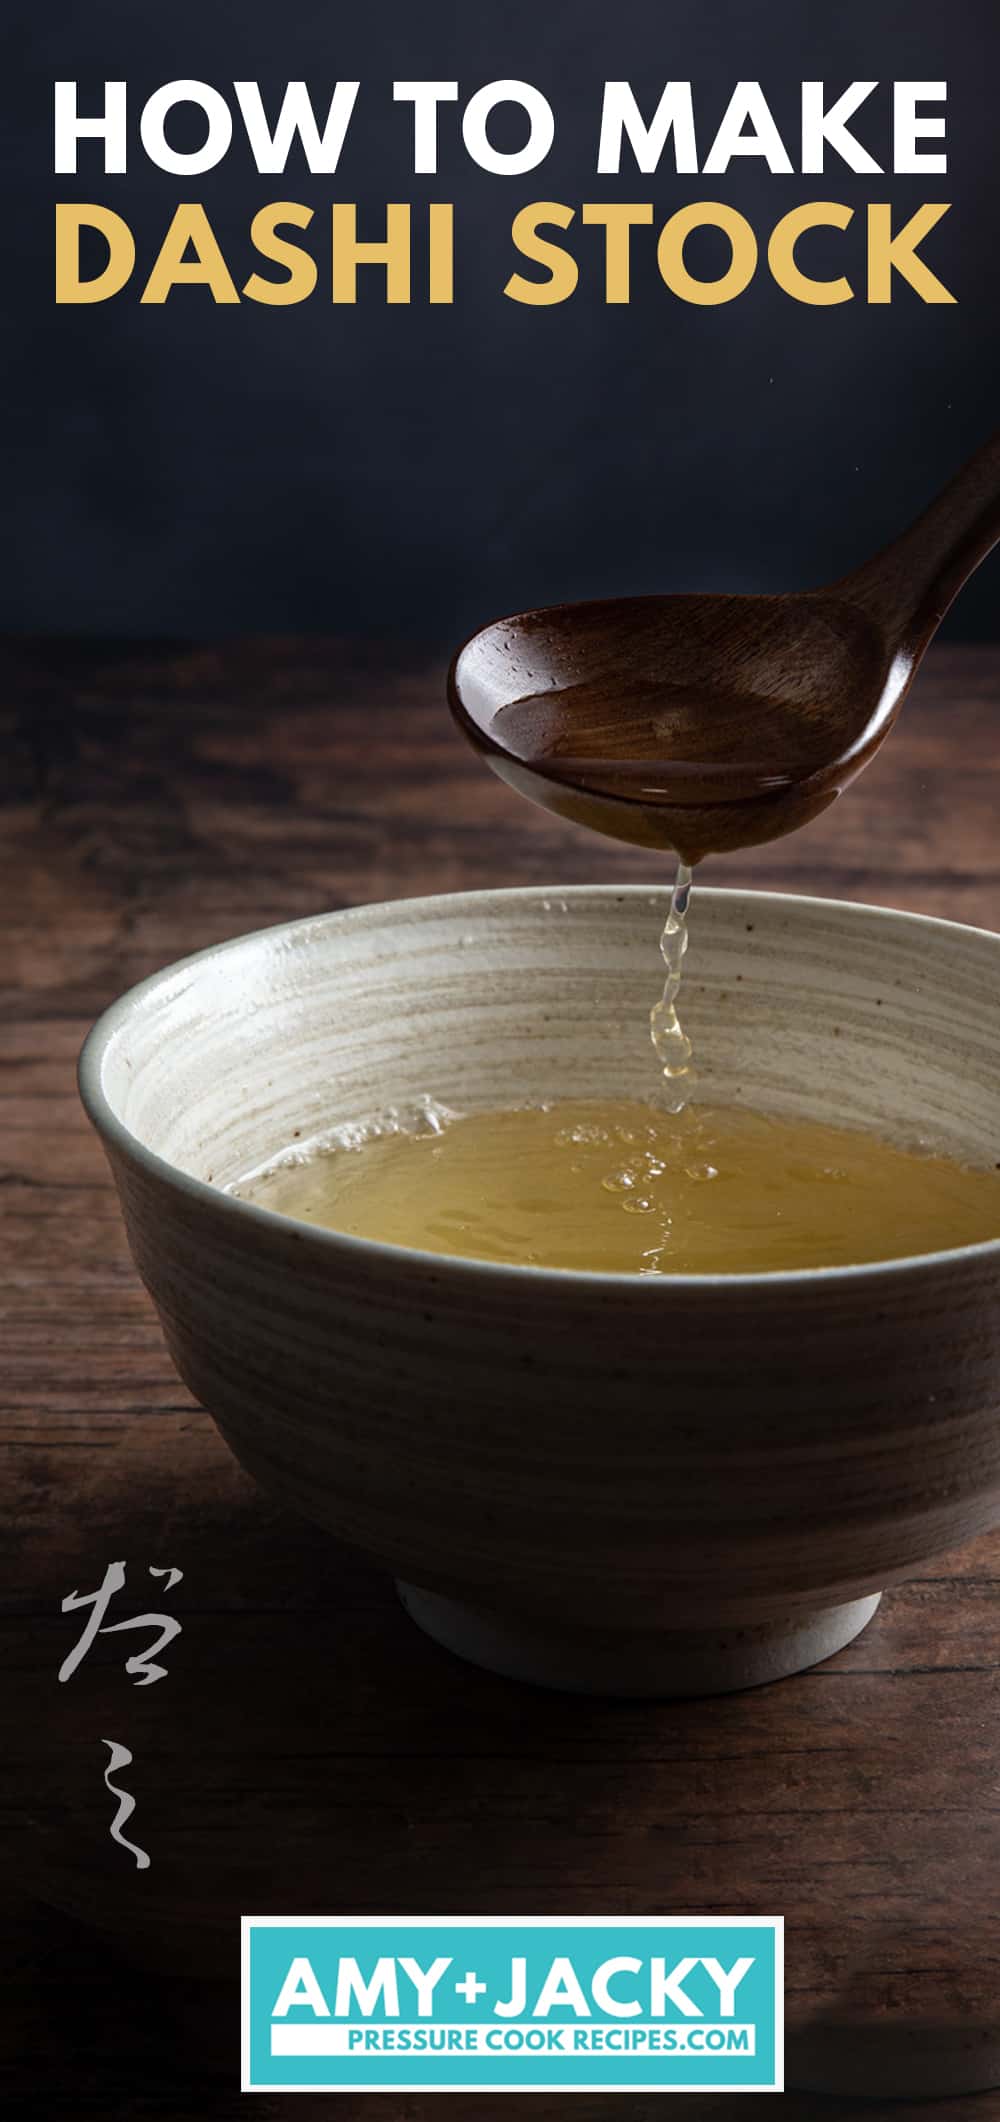 Dashi: How to make Dashi (だし, 出汁) Guide in 3 simple steps. Easy to make this versatile dashi stock that is the soul of many Japanese dishes. Get ready to enjoy many delicious dishes using this intense umami-bombing dashi broth!